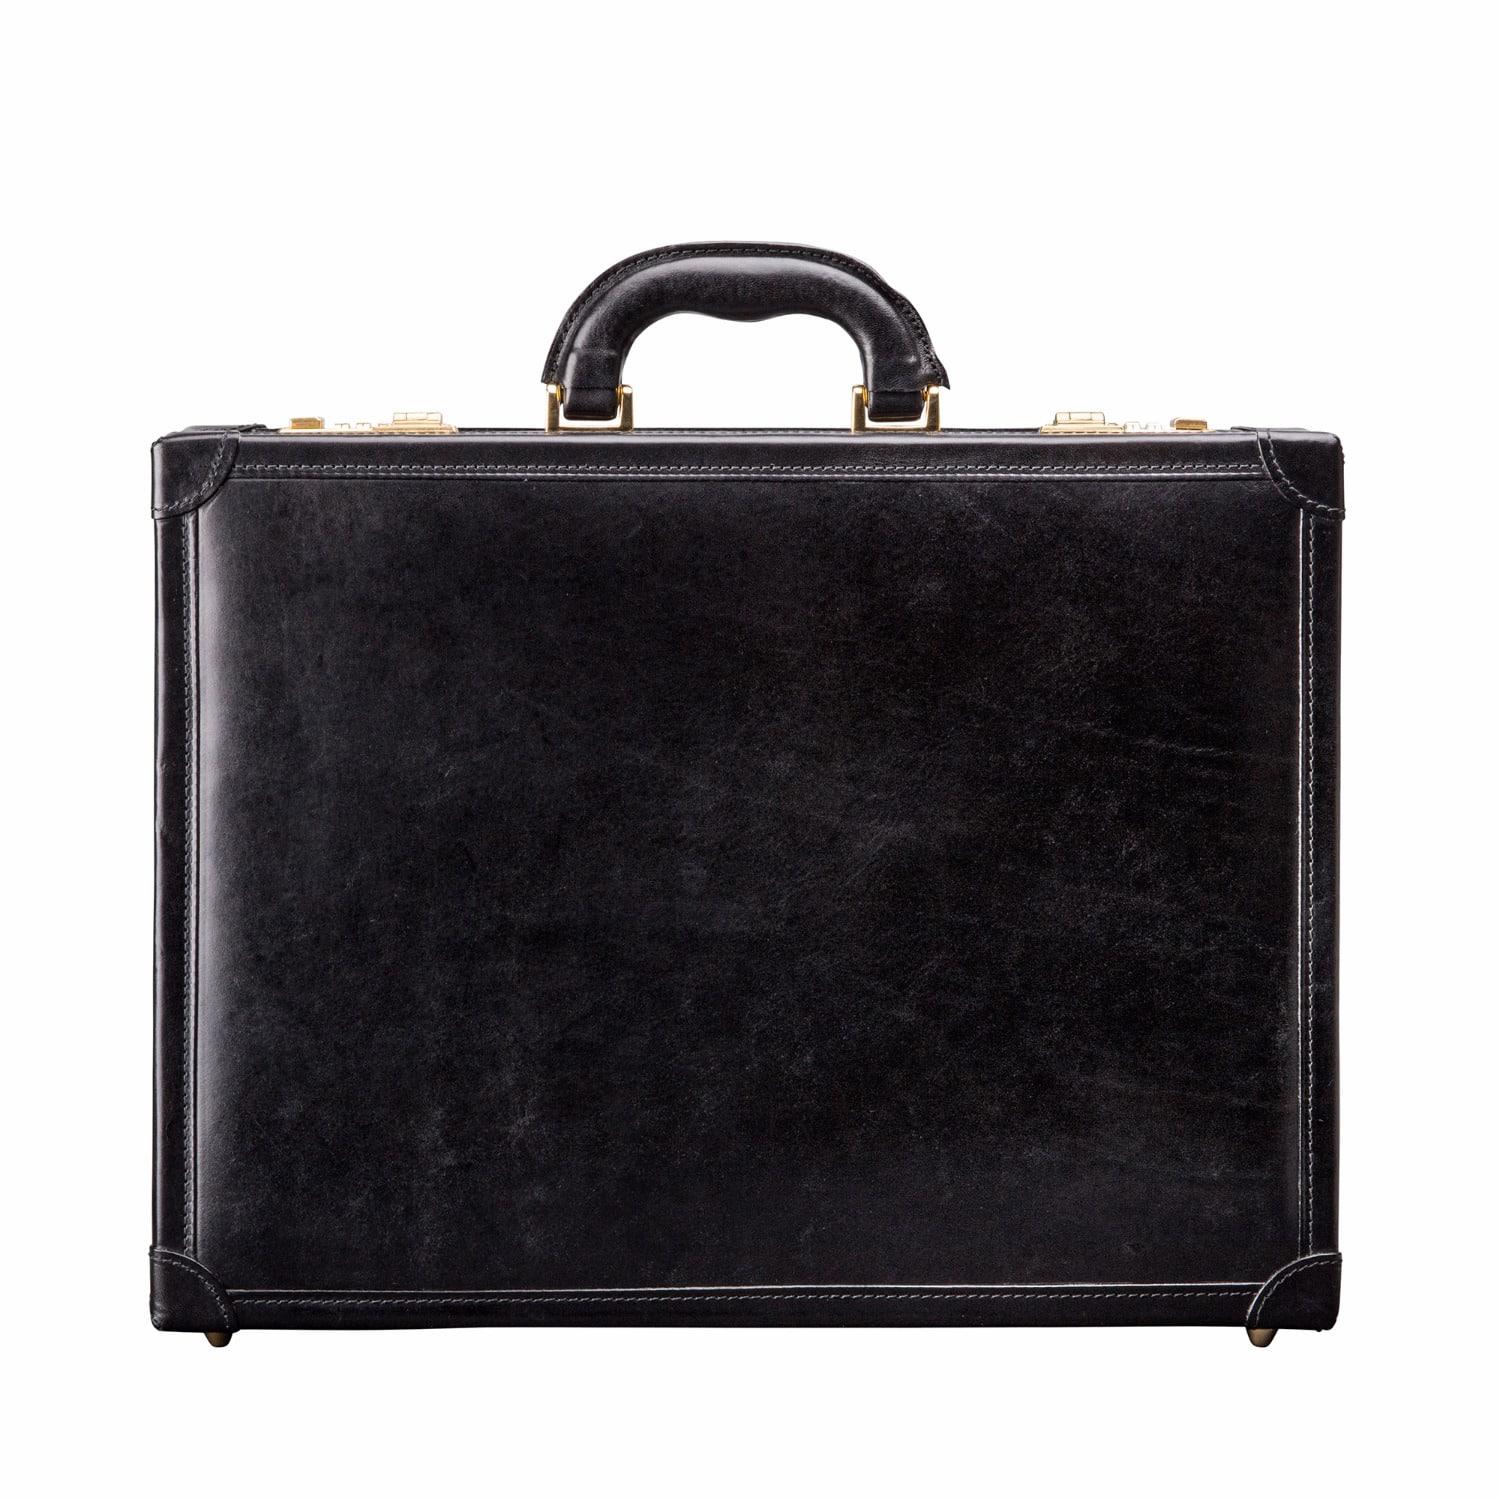 Lyst - Maxwell Scott Bags The Scanno Luxury Slim Leather Attaché Case ...